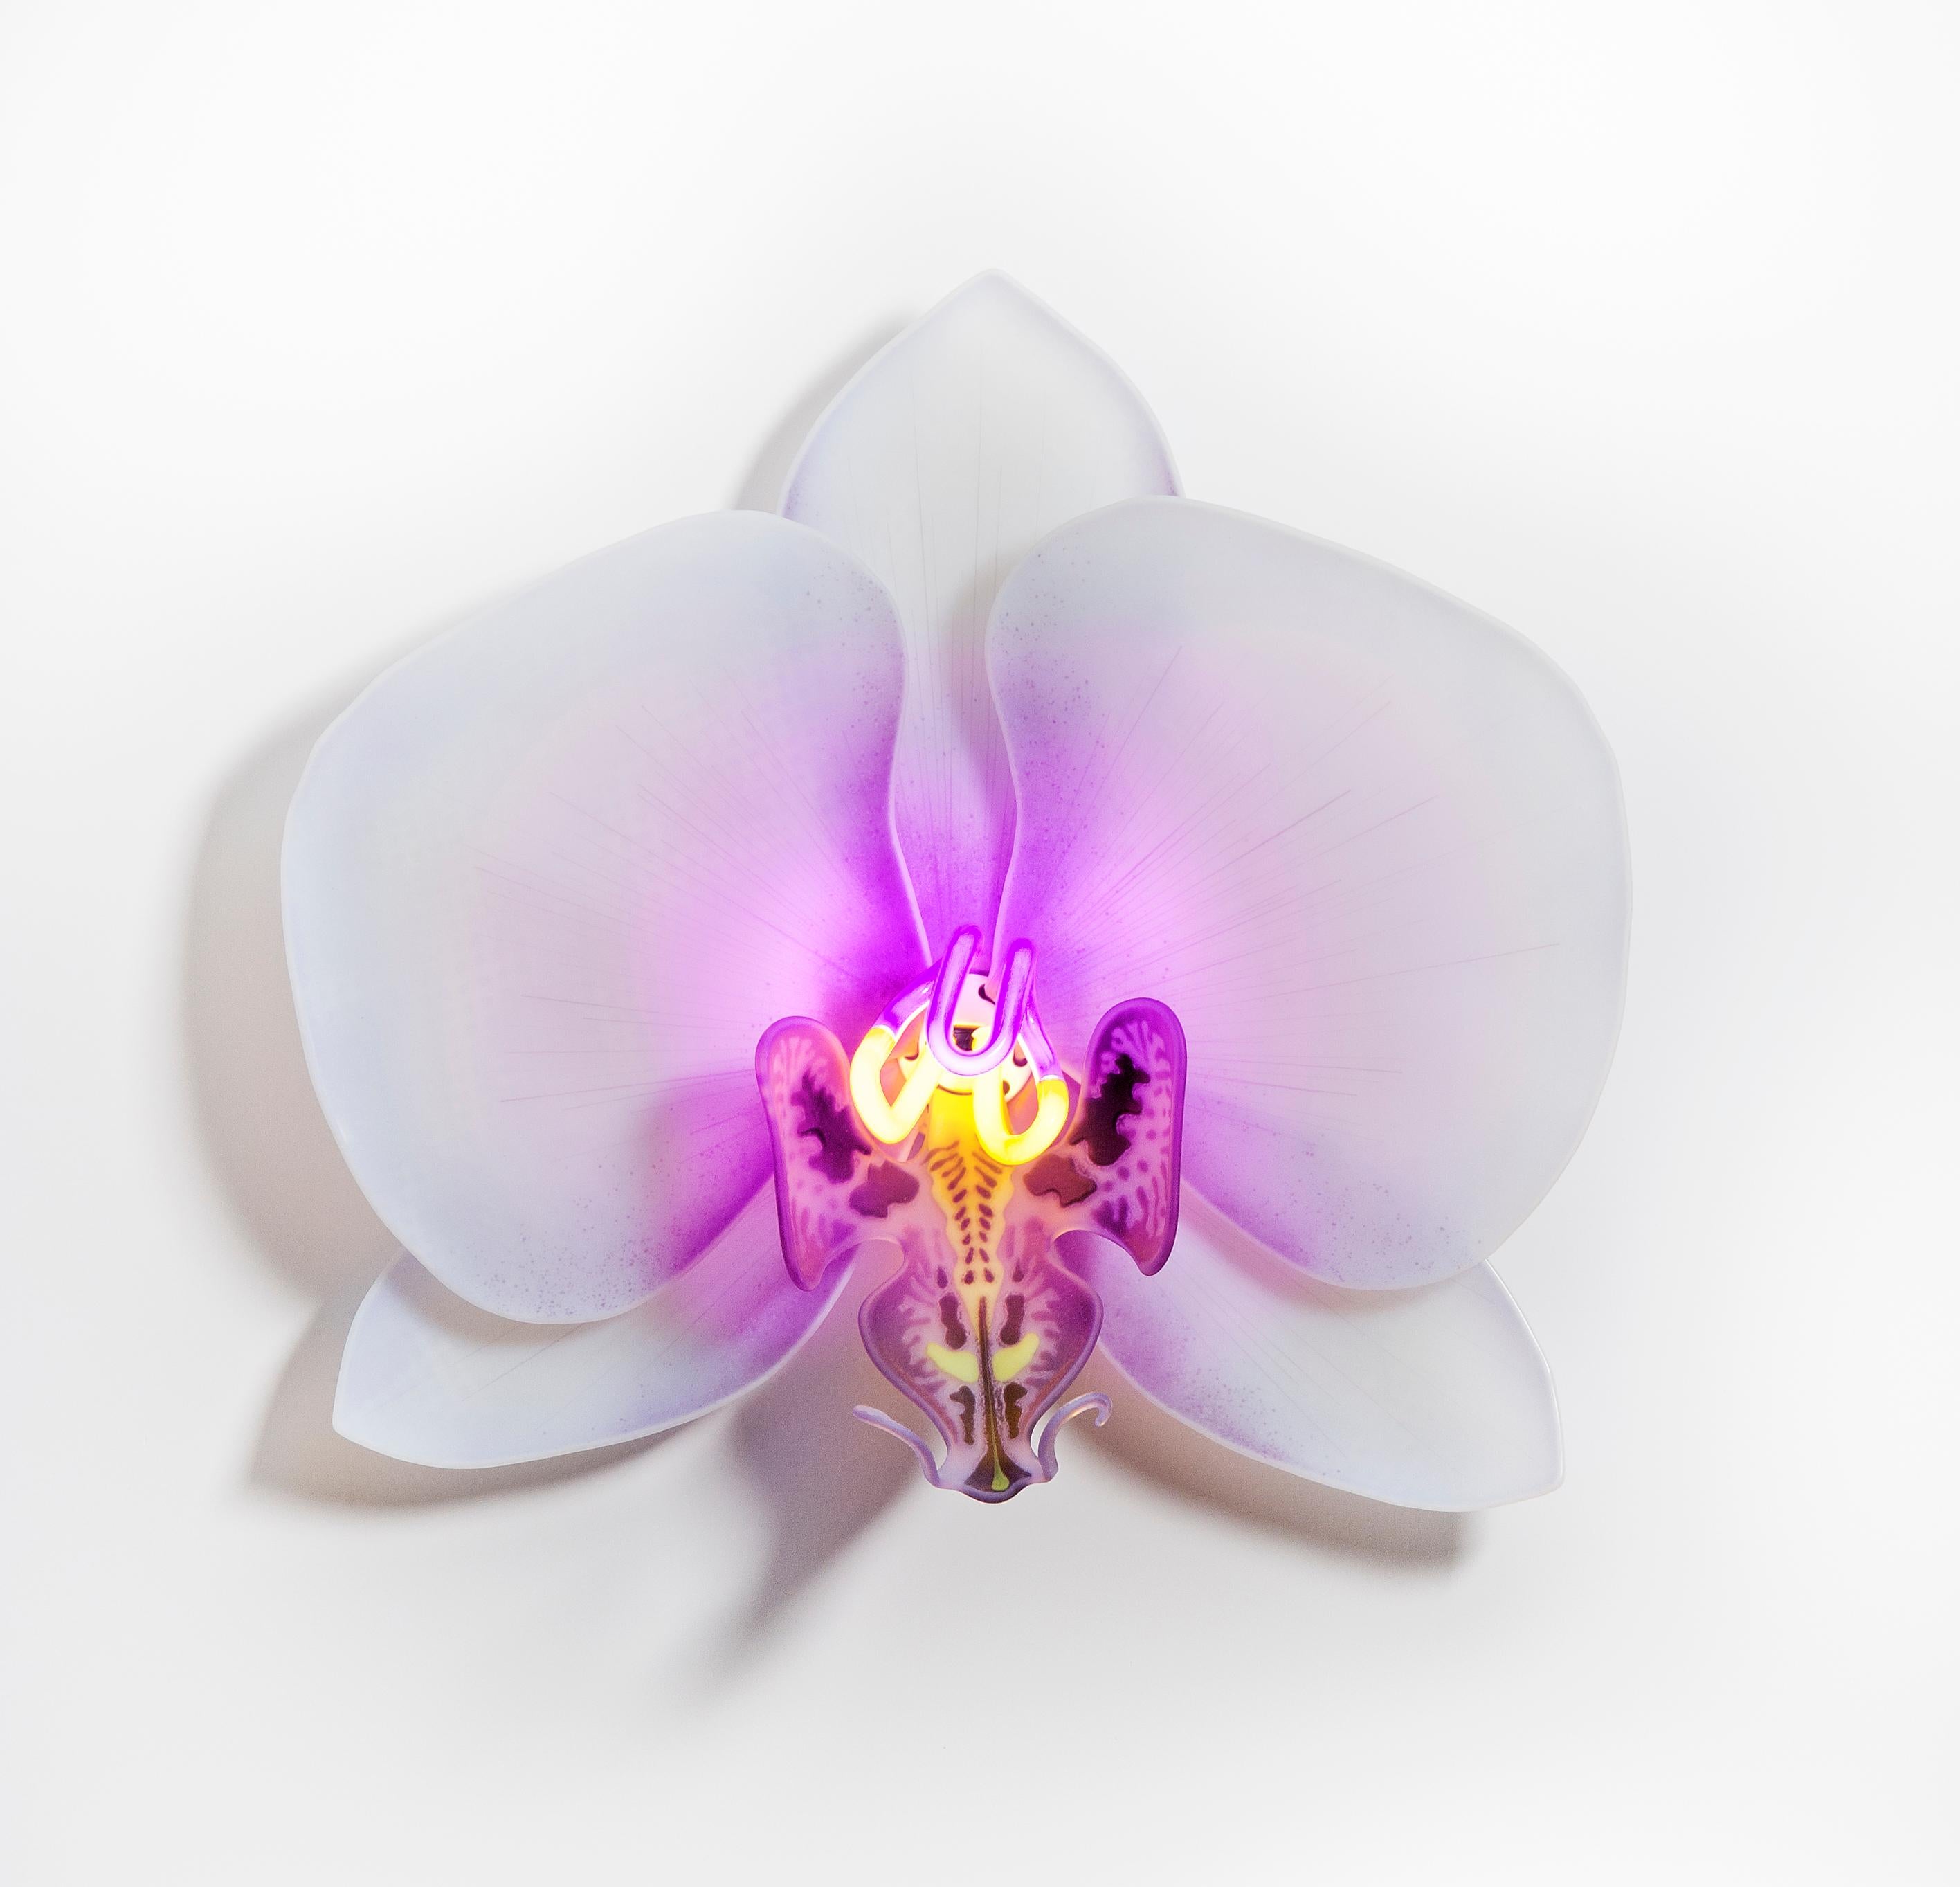 Orchis Exotica Phalaenopsis Violet is a unique glass & neon sculptural wall mounted orchid by the British artist Laura Hart.

The Orchis Exotica Collection are created from 6 components/petals ( each hand made and fused & slumped glass) which fit